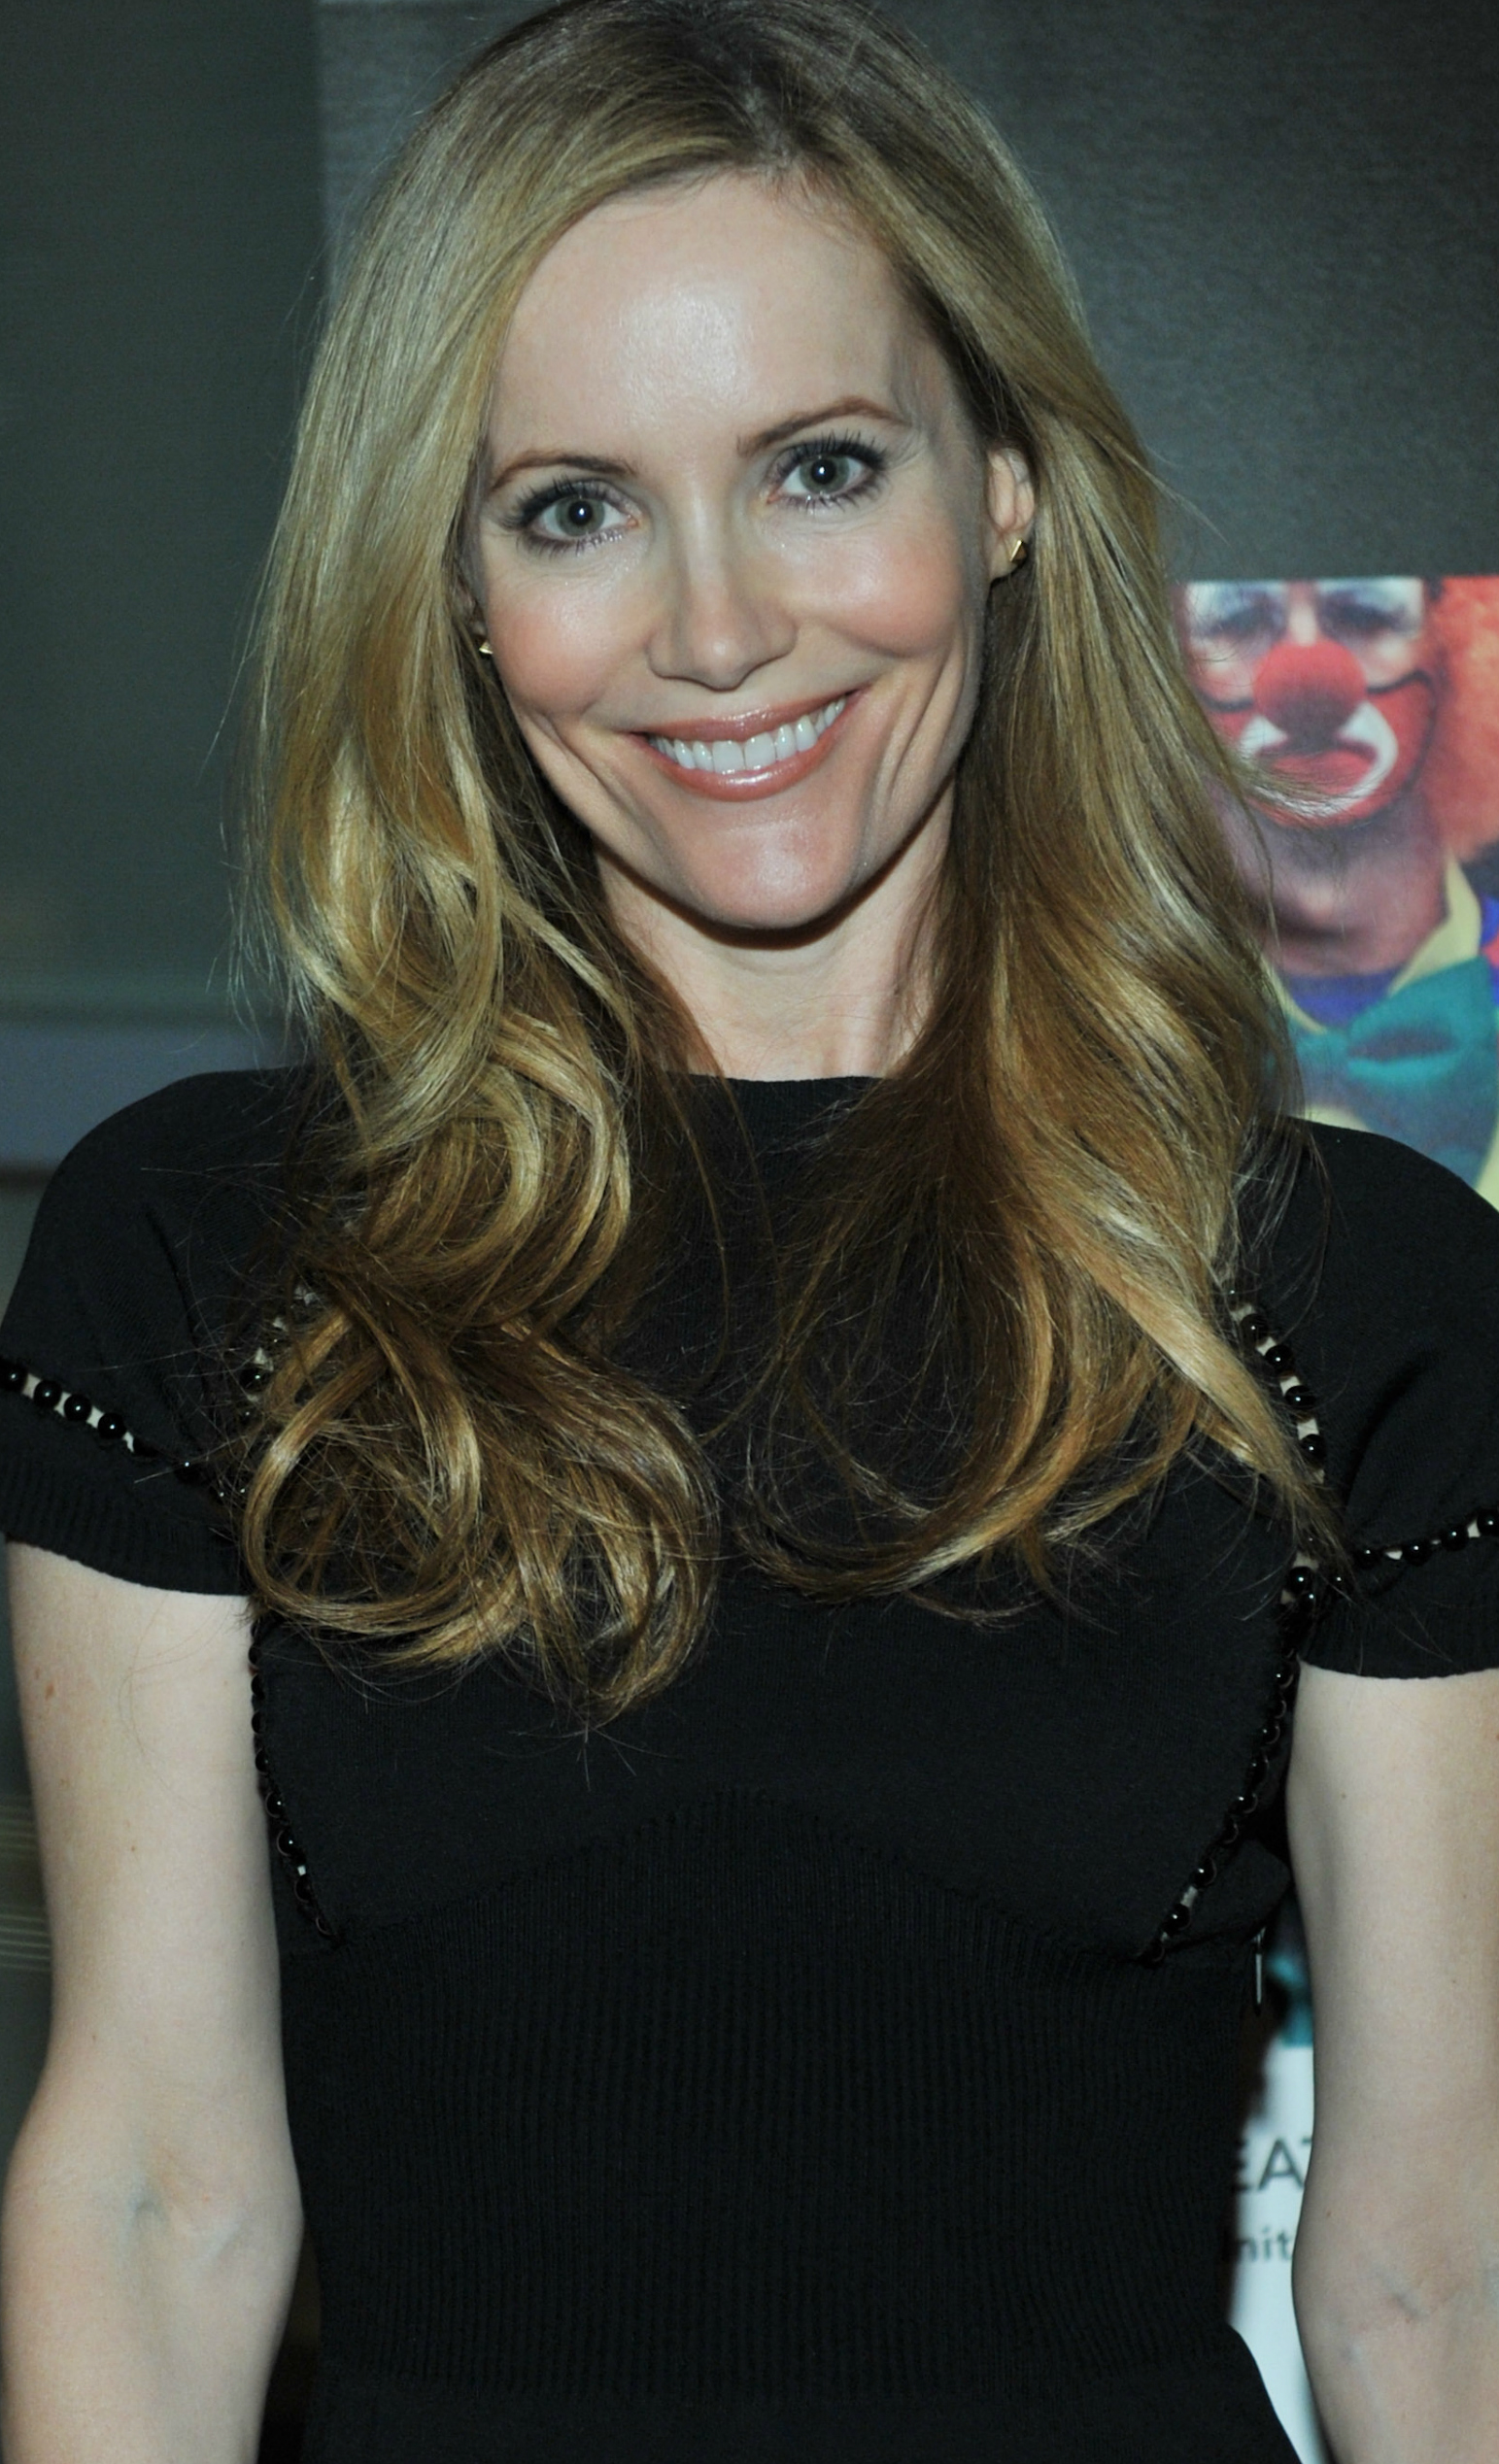 Leslie Mann Joins Robert De Niro In "The Comedian" - The Tracking Board